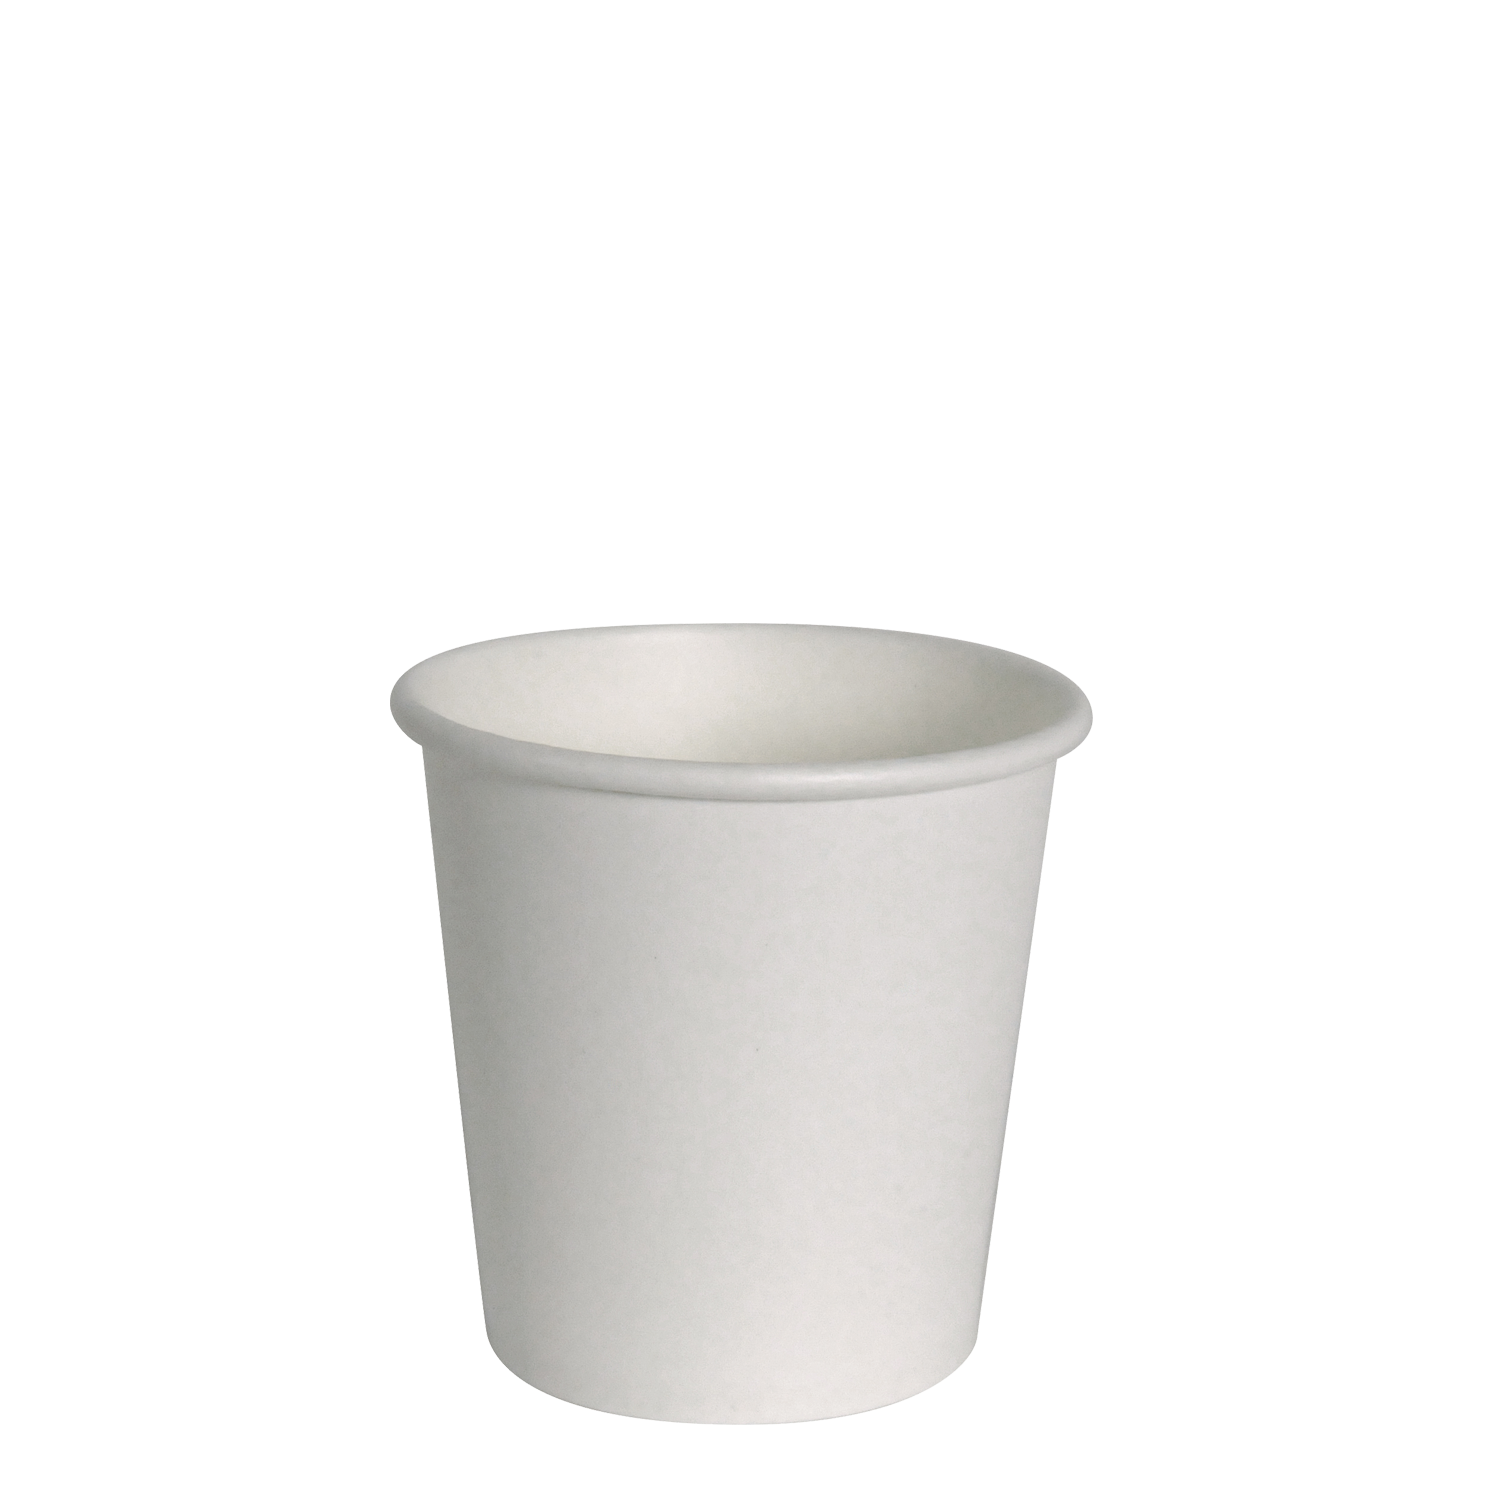 disposable hot cups